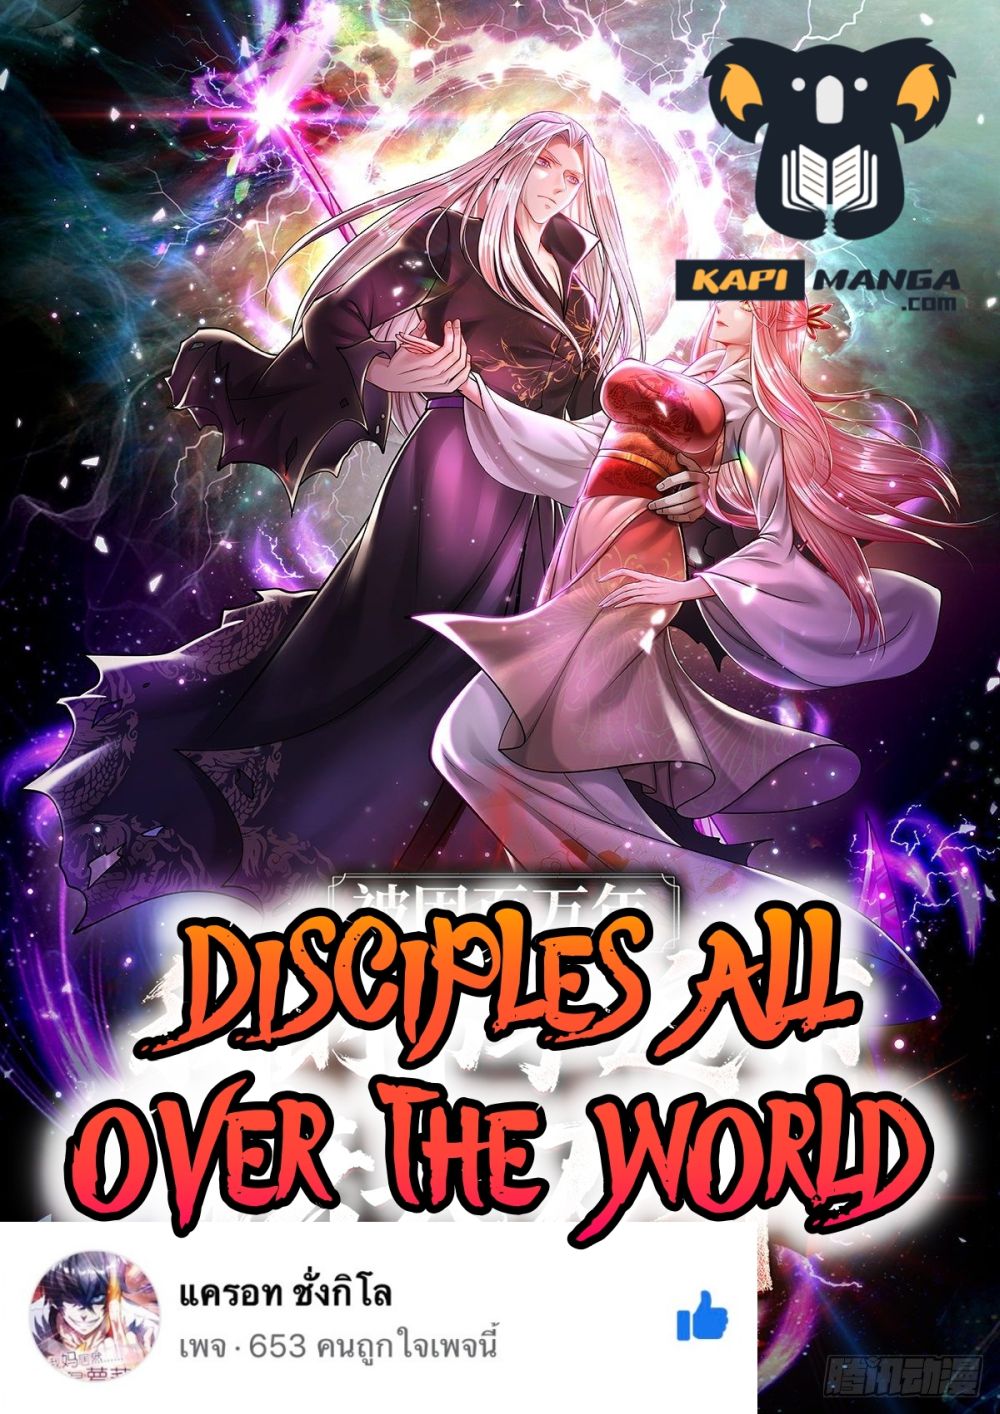 Disciples All Over the World à¸à¸­à¸à¸à¸µà¹ 27 (1)